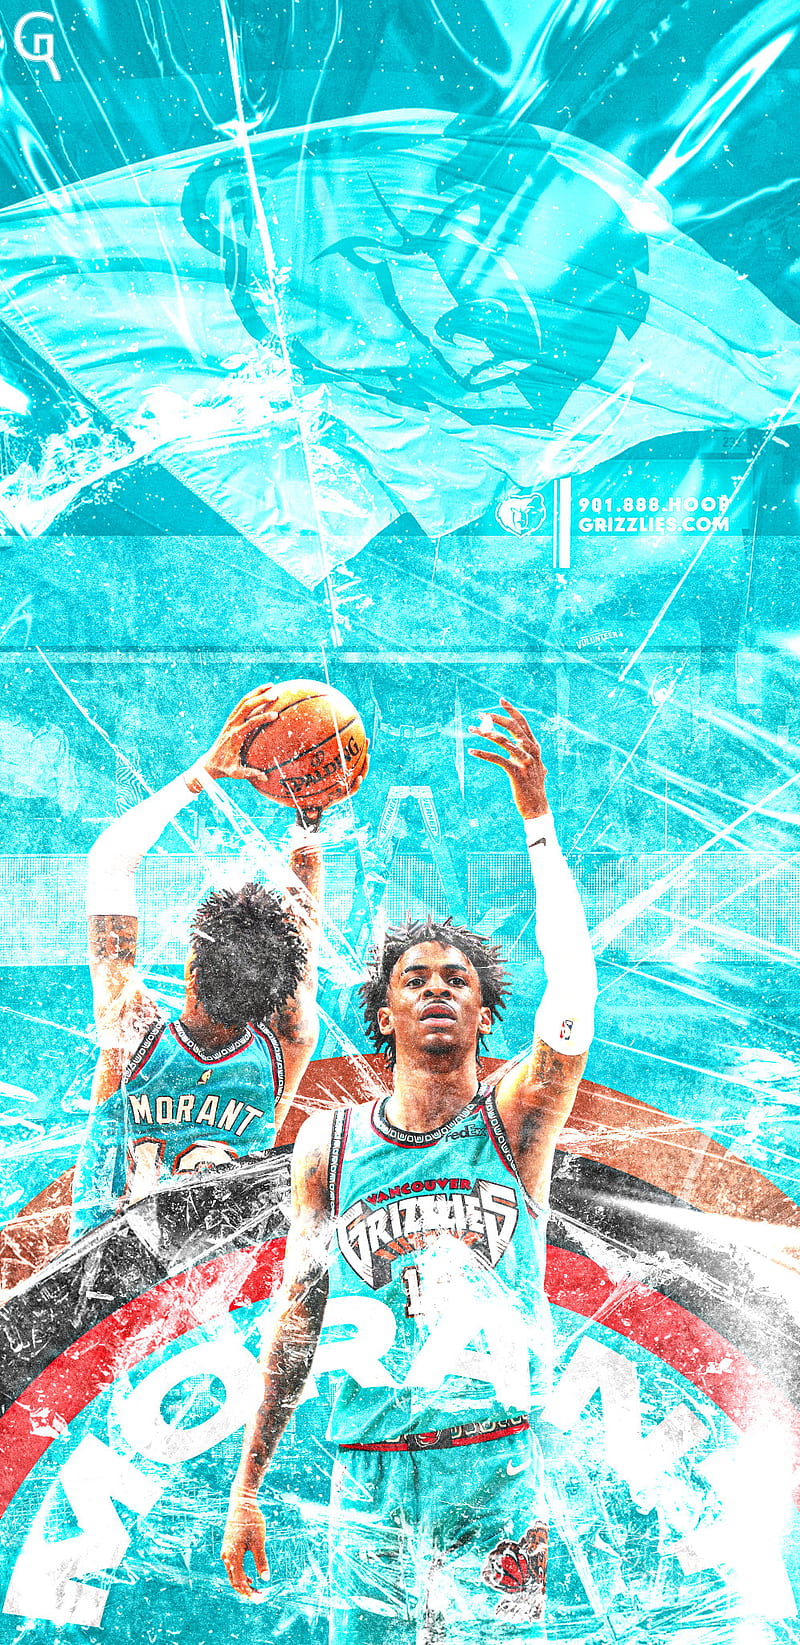 Memphis Grizzlies on X: coming to a wallpaper near you. @JaMorant